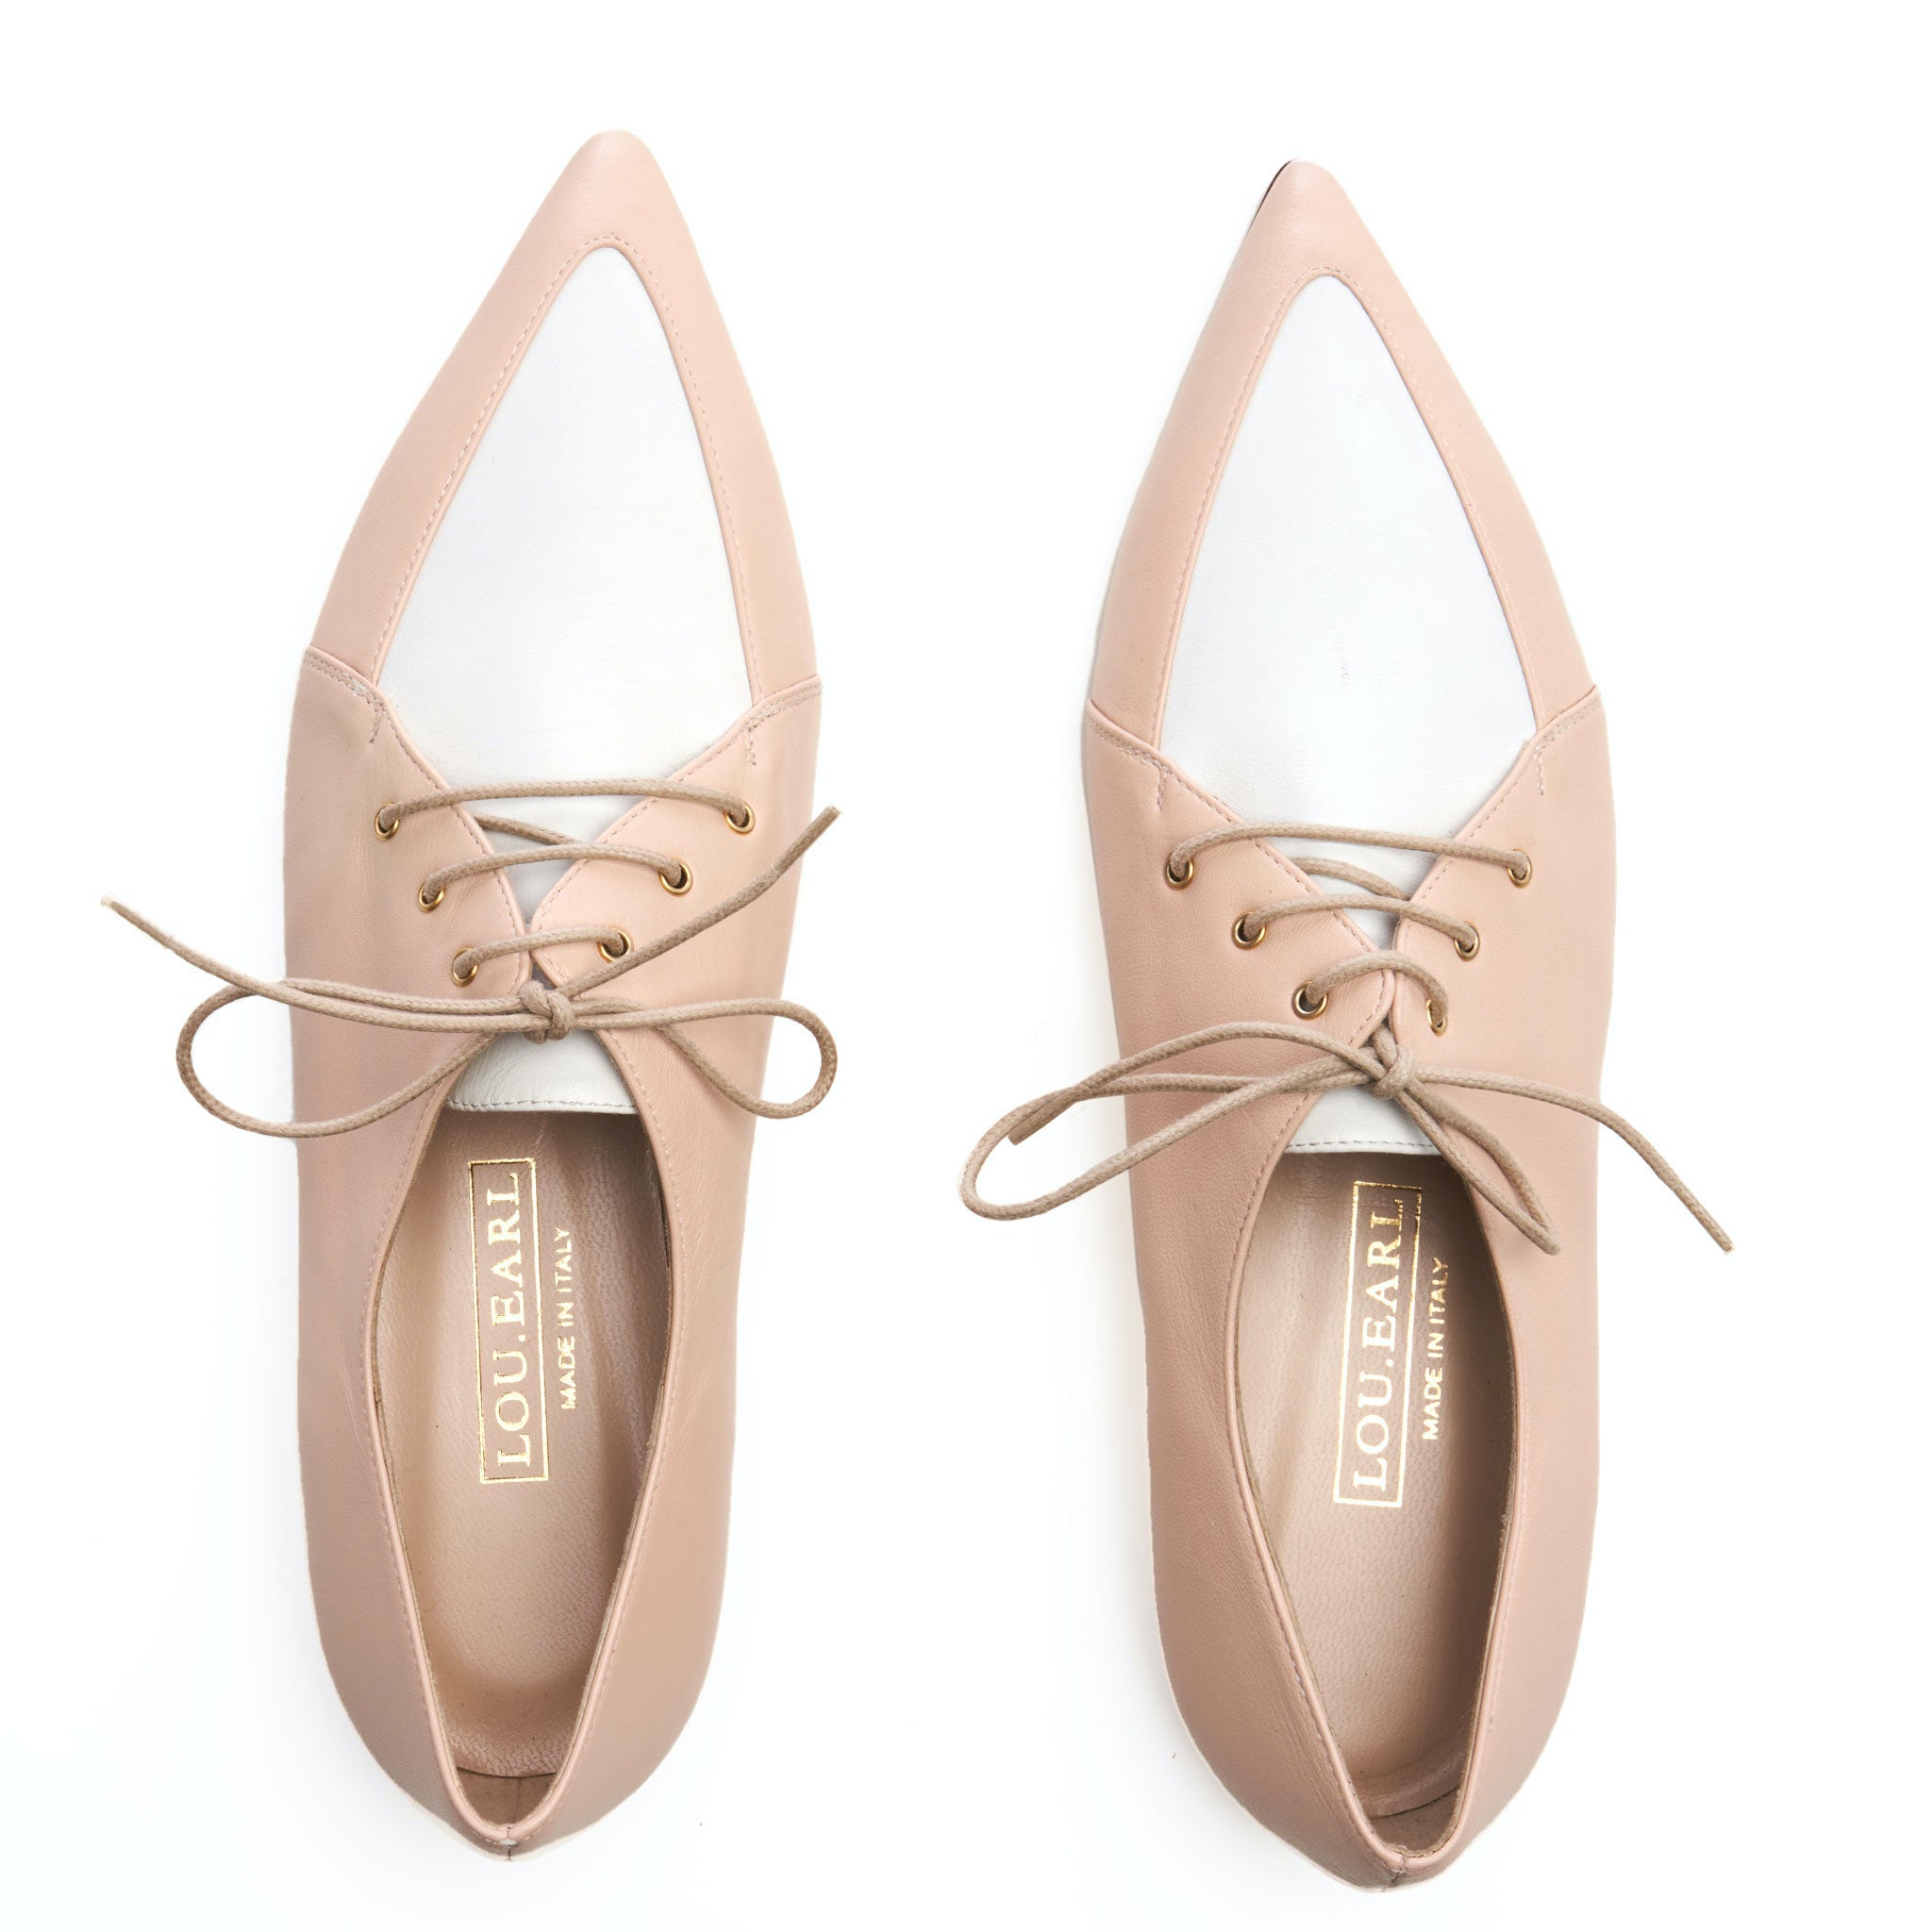 neutral blush color and white two tone lace up Oxford shoes for women with pointed toe. tan round laces and gold foil logo.